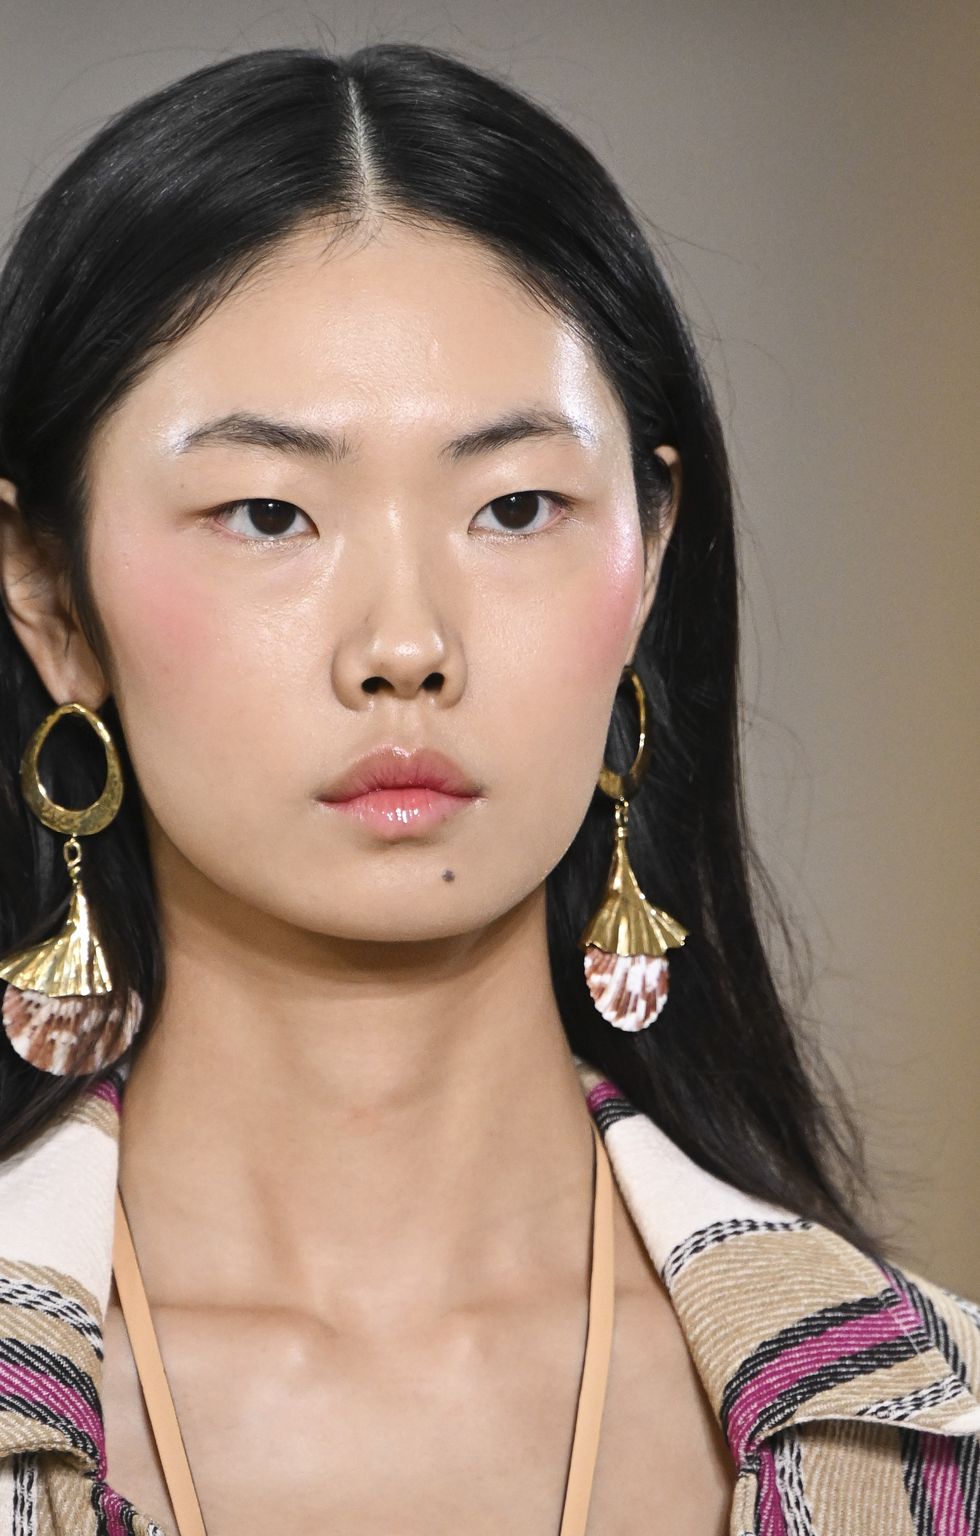 Every Summer 2023 Jewelry Trend to Know